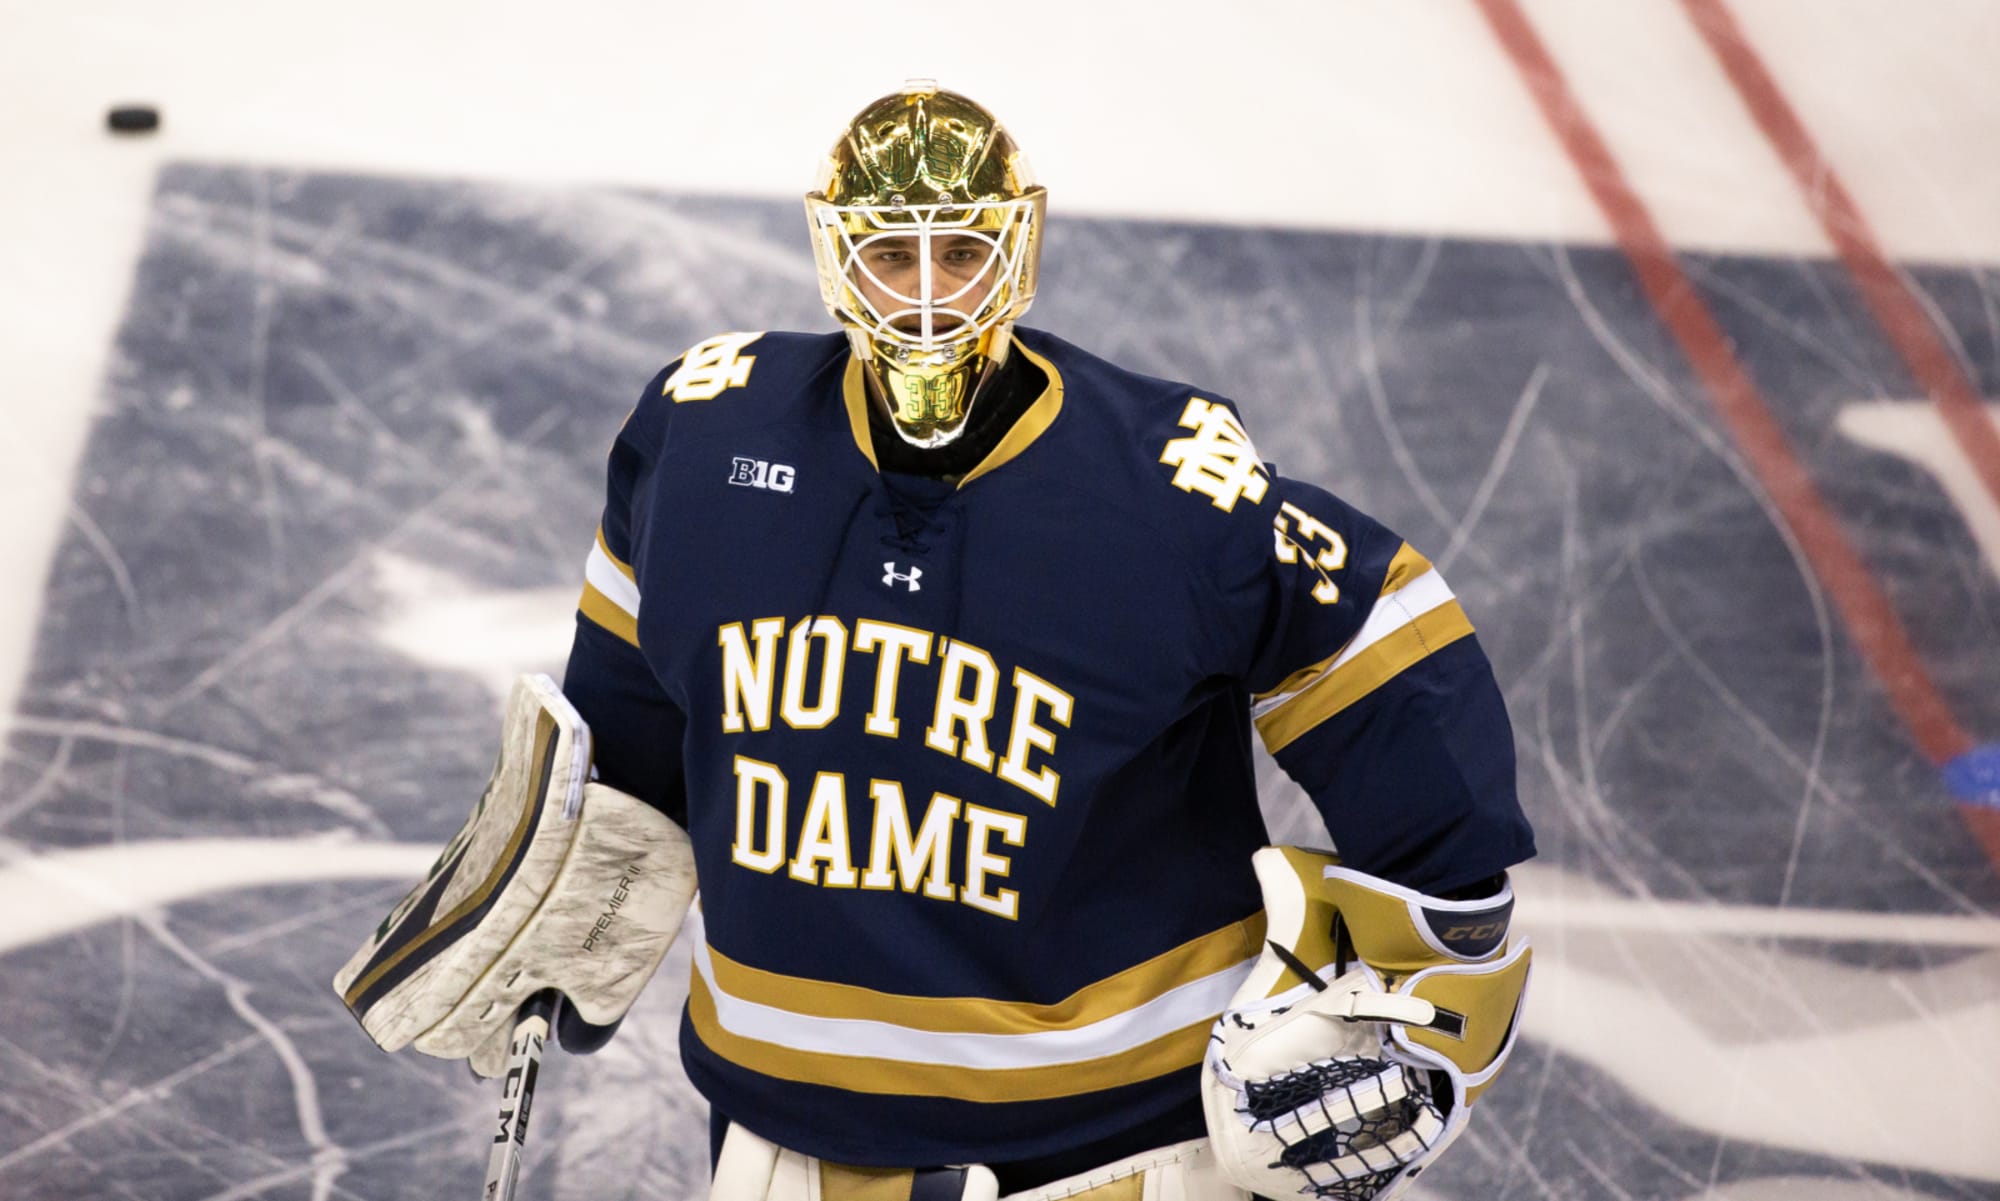 Notre Dame Hockey 3 players that will be drafted to the NHL